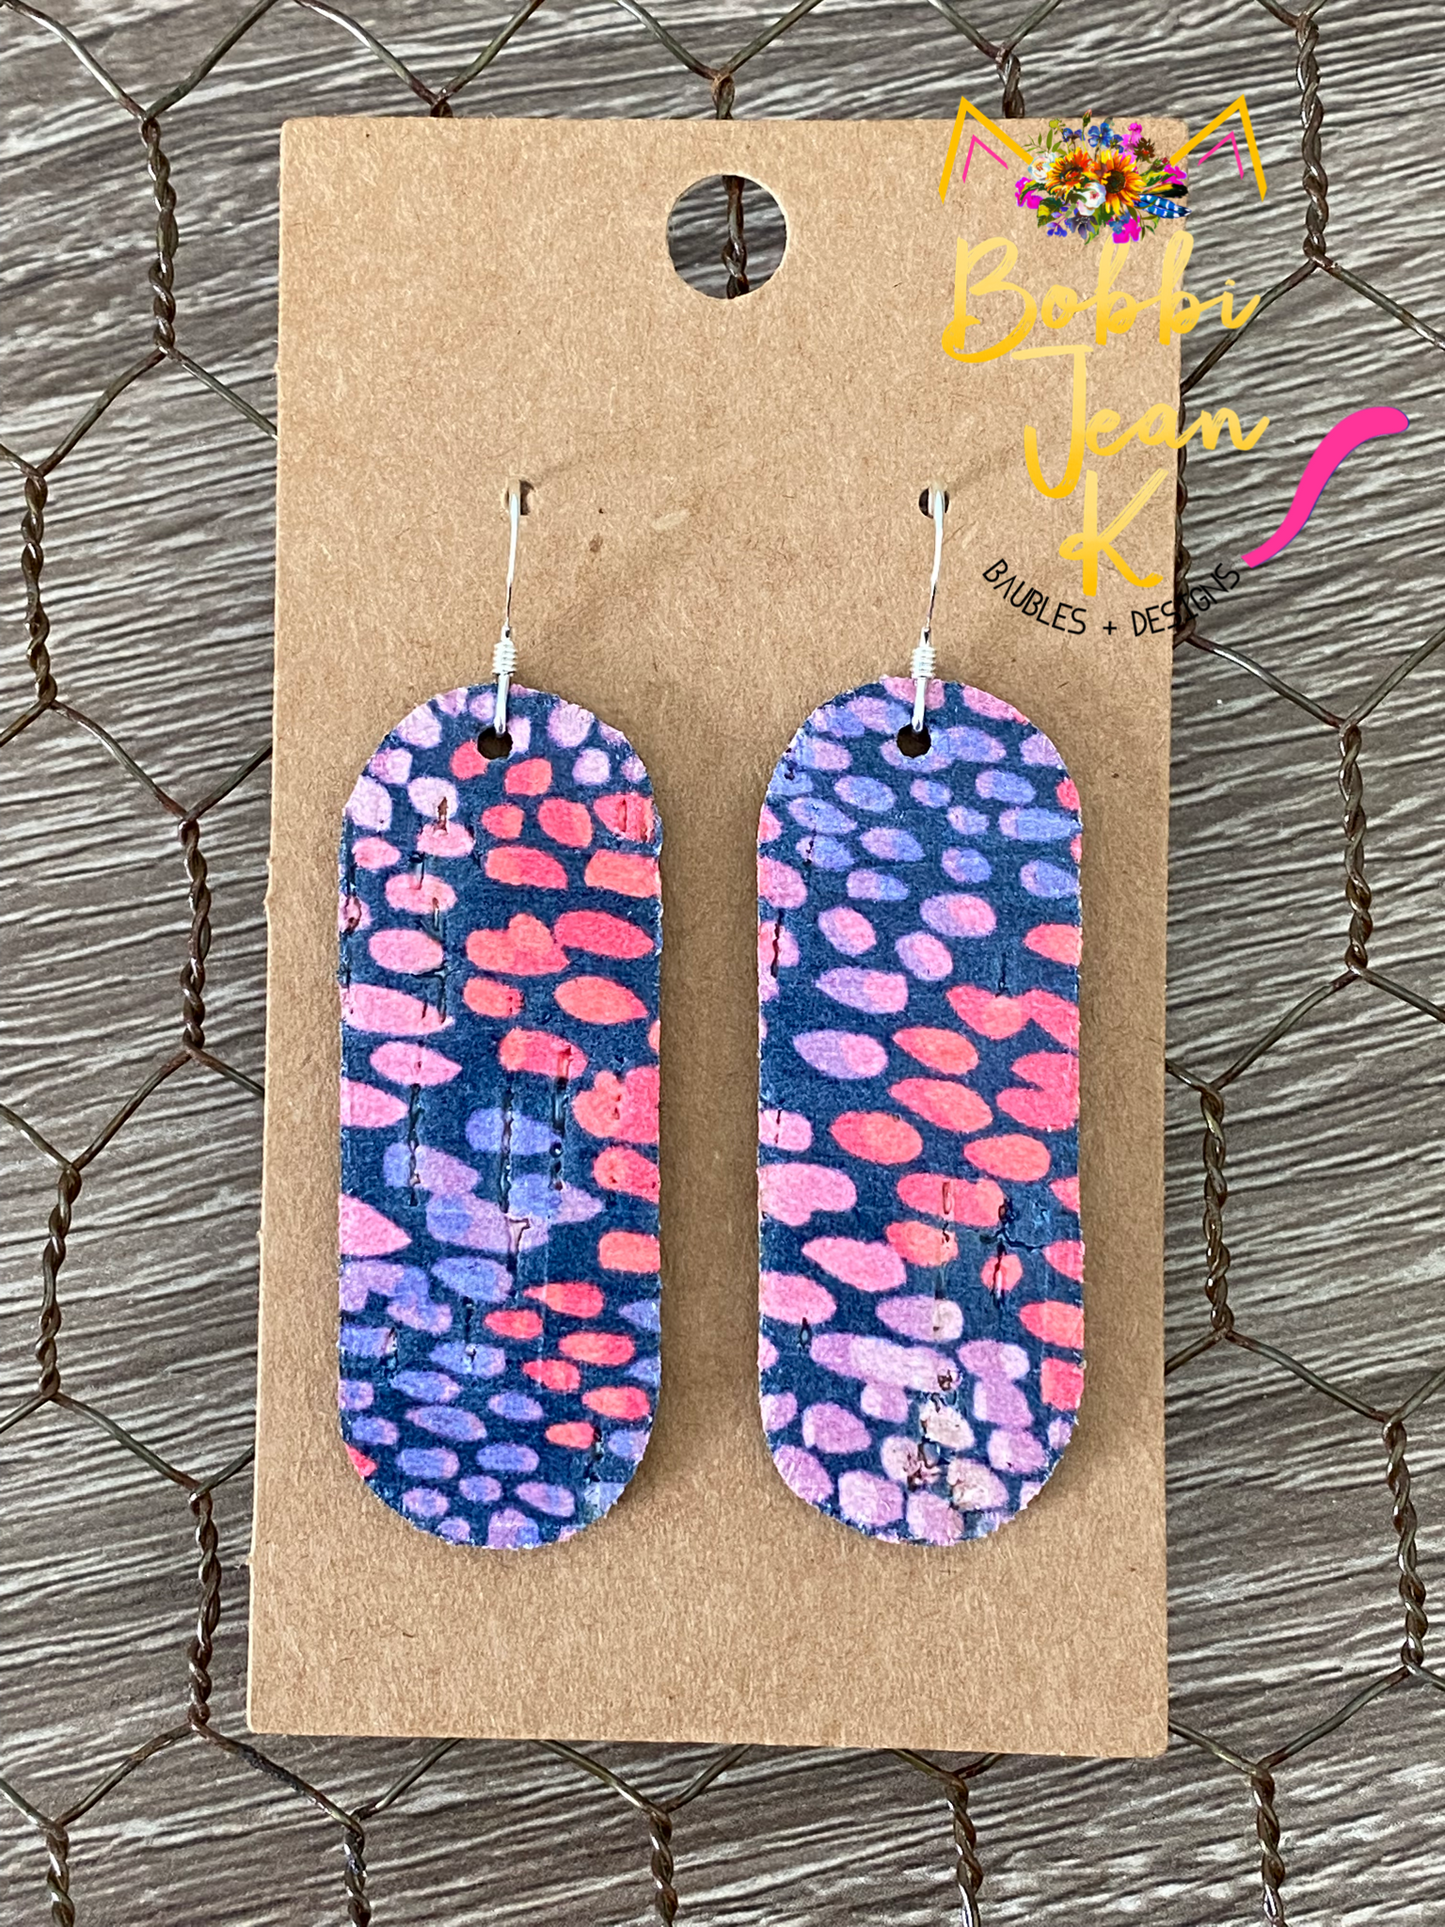 Berrylicious Reptile Cork on Leather Earrings: Open Oval, Bar, & Mini Oval Shape Options